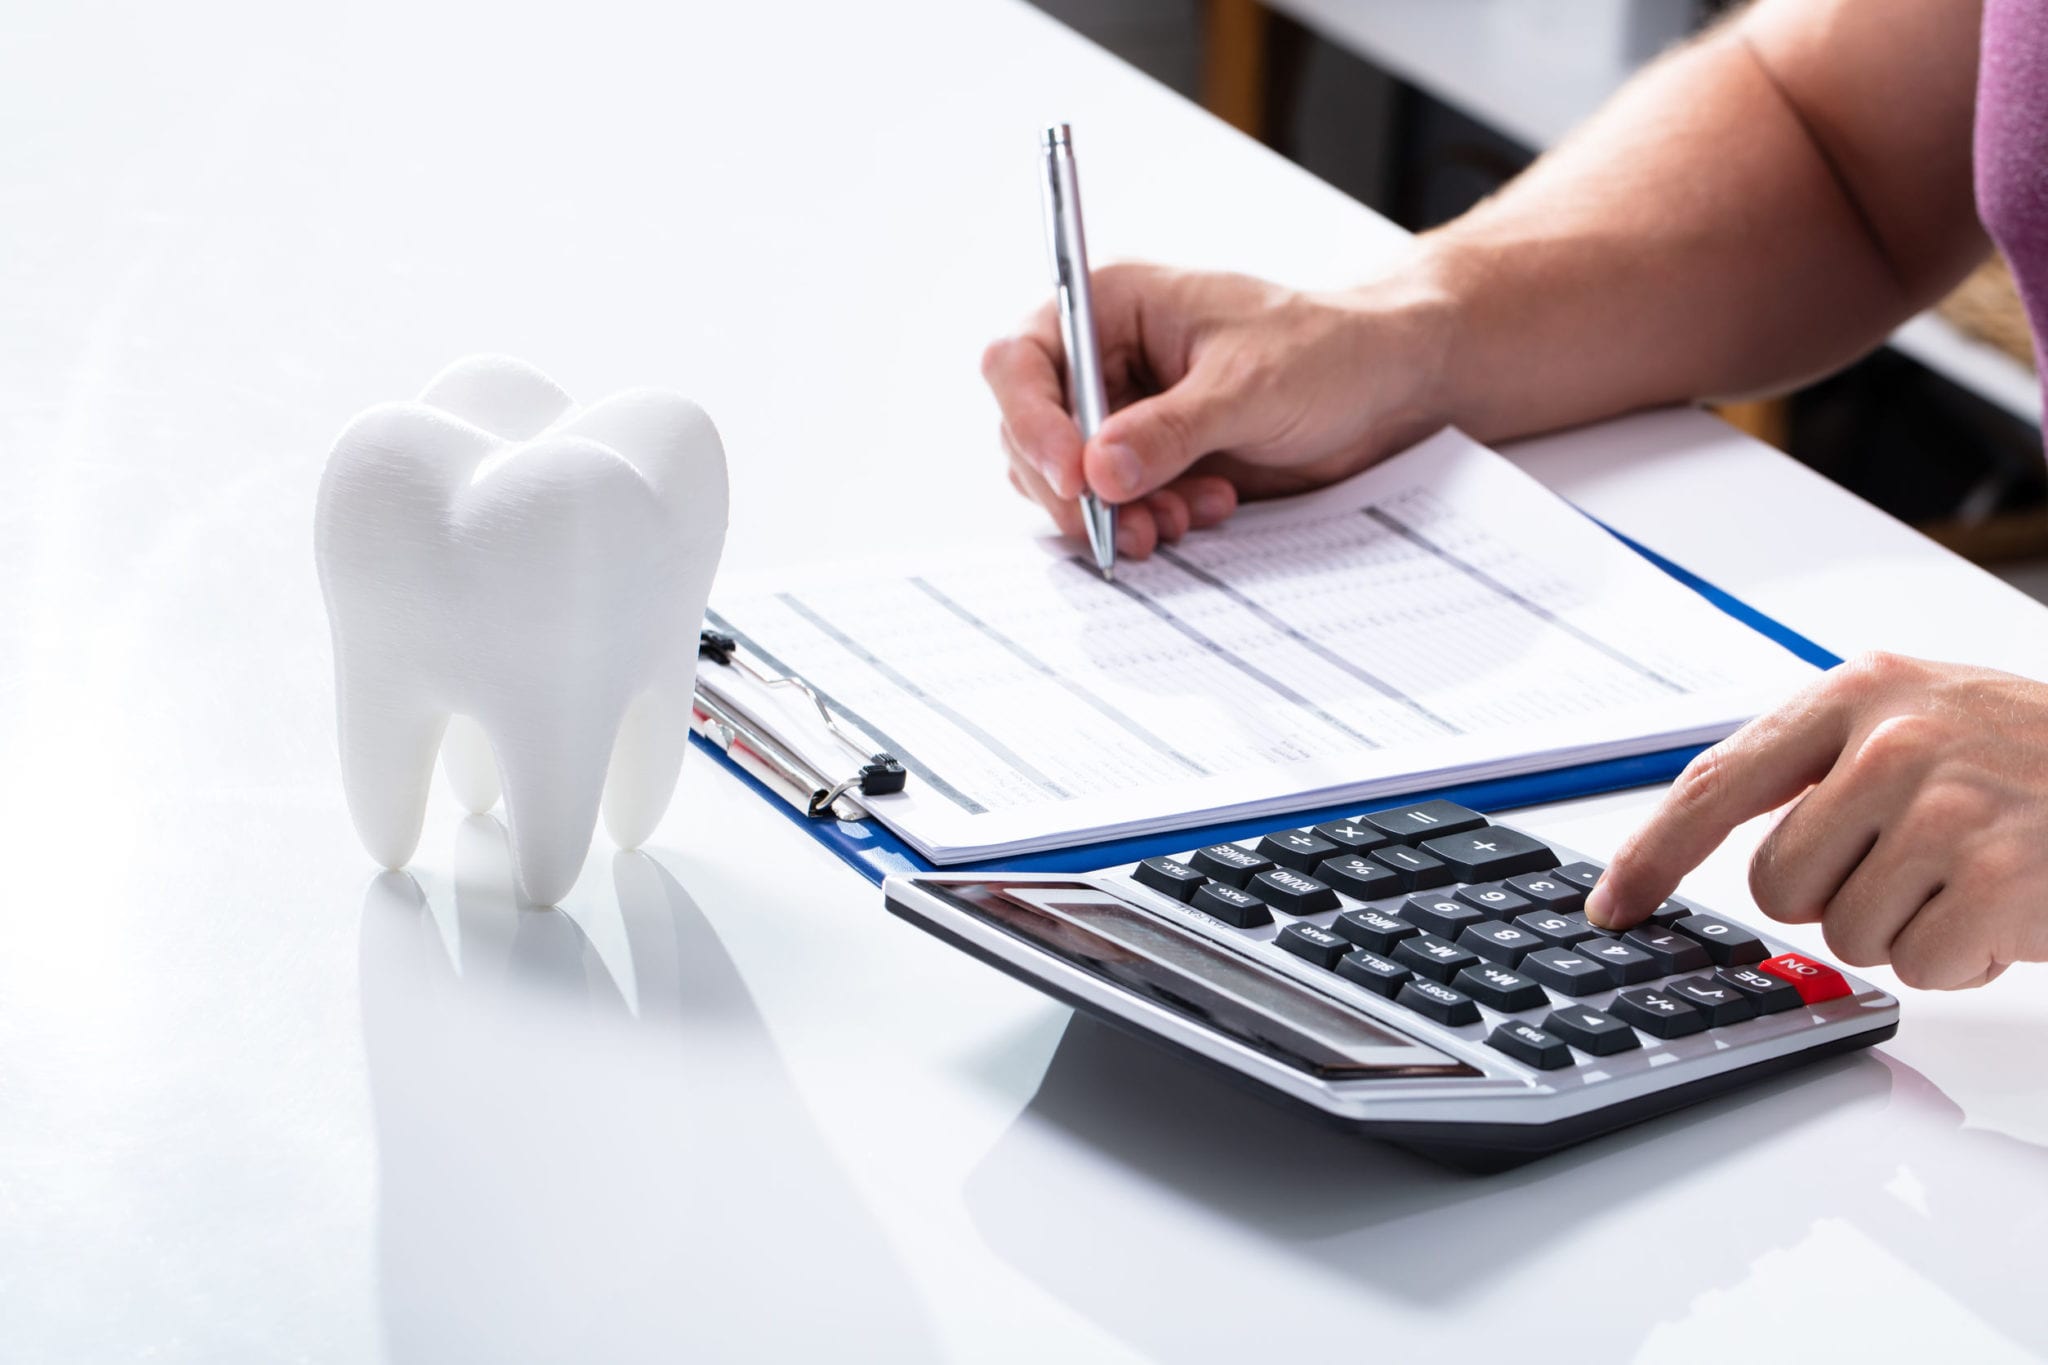 Self Pay Patient? Talk to South Florida Dental About CareCredit